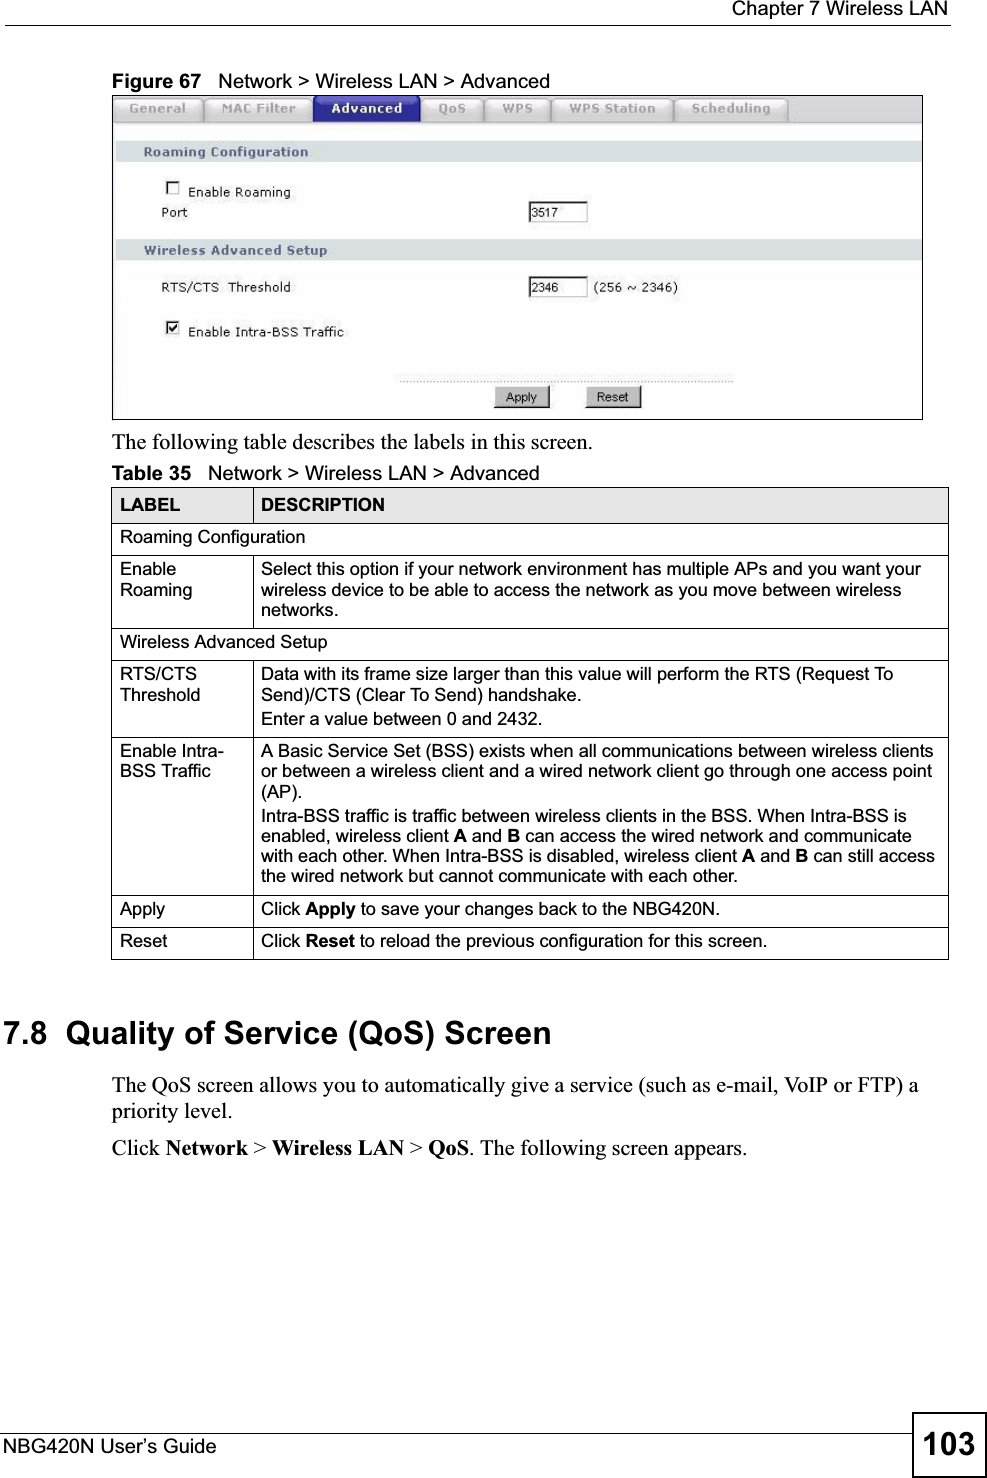  Chapter 7 Wireless LANNBG420N User’s Guide 103Figure 67   Network &gt; Wireless LAN &gt; AdvancedThe following table describes the labels in this screen. 7.8  Quality of Service (QoS) ScreenThe QoS screen allows you to automatically give a service (such as e-mail, VoIP or FTP) a priority level.Click Network &gt; Wireless LAN &gt; QoS. The following screen appears.Table 35   Network &gt; Wireless LAN &gt; AdvancedLABEL DESCRIPTIONRoaming ConfigurationEnable RoamingSelect this option if your network environment has multiple APs and you want your wireless device to be able to access the network as you move between wireless networks.Wireless Advanced SetupRTS/CTS ThresholdData with its frame size larger than this value will perform the RTS (Request To Send)/CTS (Clear To Send) handshake. Enter a value between 0 and 2432. Enable Intra-BSS TrafficA Basic Service Set (BSS) exists when all communications between wireless clients or between a wireless client and a wired network client go through one access point (AP). Intra-BSS traffic is traffic between wireless clients in the BSS. When Intra-BSS is enabled, wireless client A and B can access the wired network and communicate with each other. When Intra-BSS is disabled, wireless client A and B can still access the wired network but cannot communicate with each other.Apply Click Apply to save your changes back to the NBG420N.Reset Click Reset to reload the previous configuration for this screen.